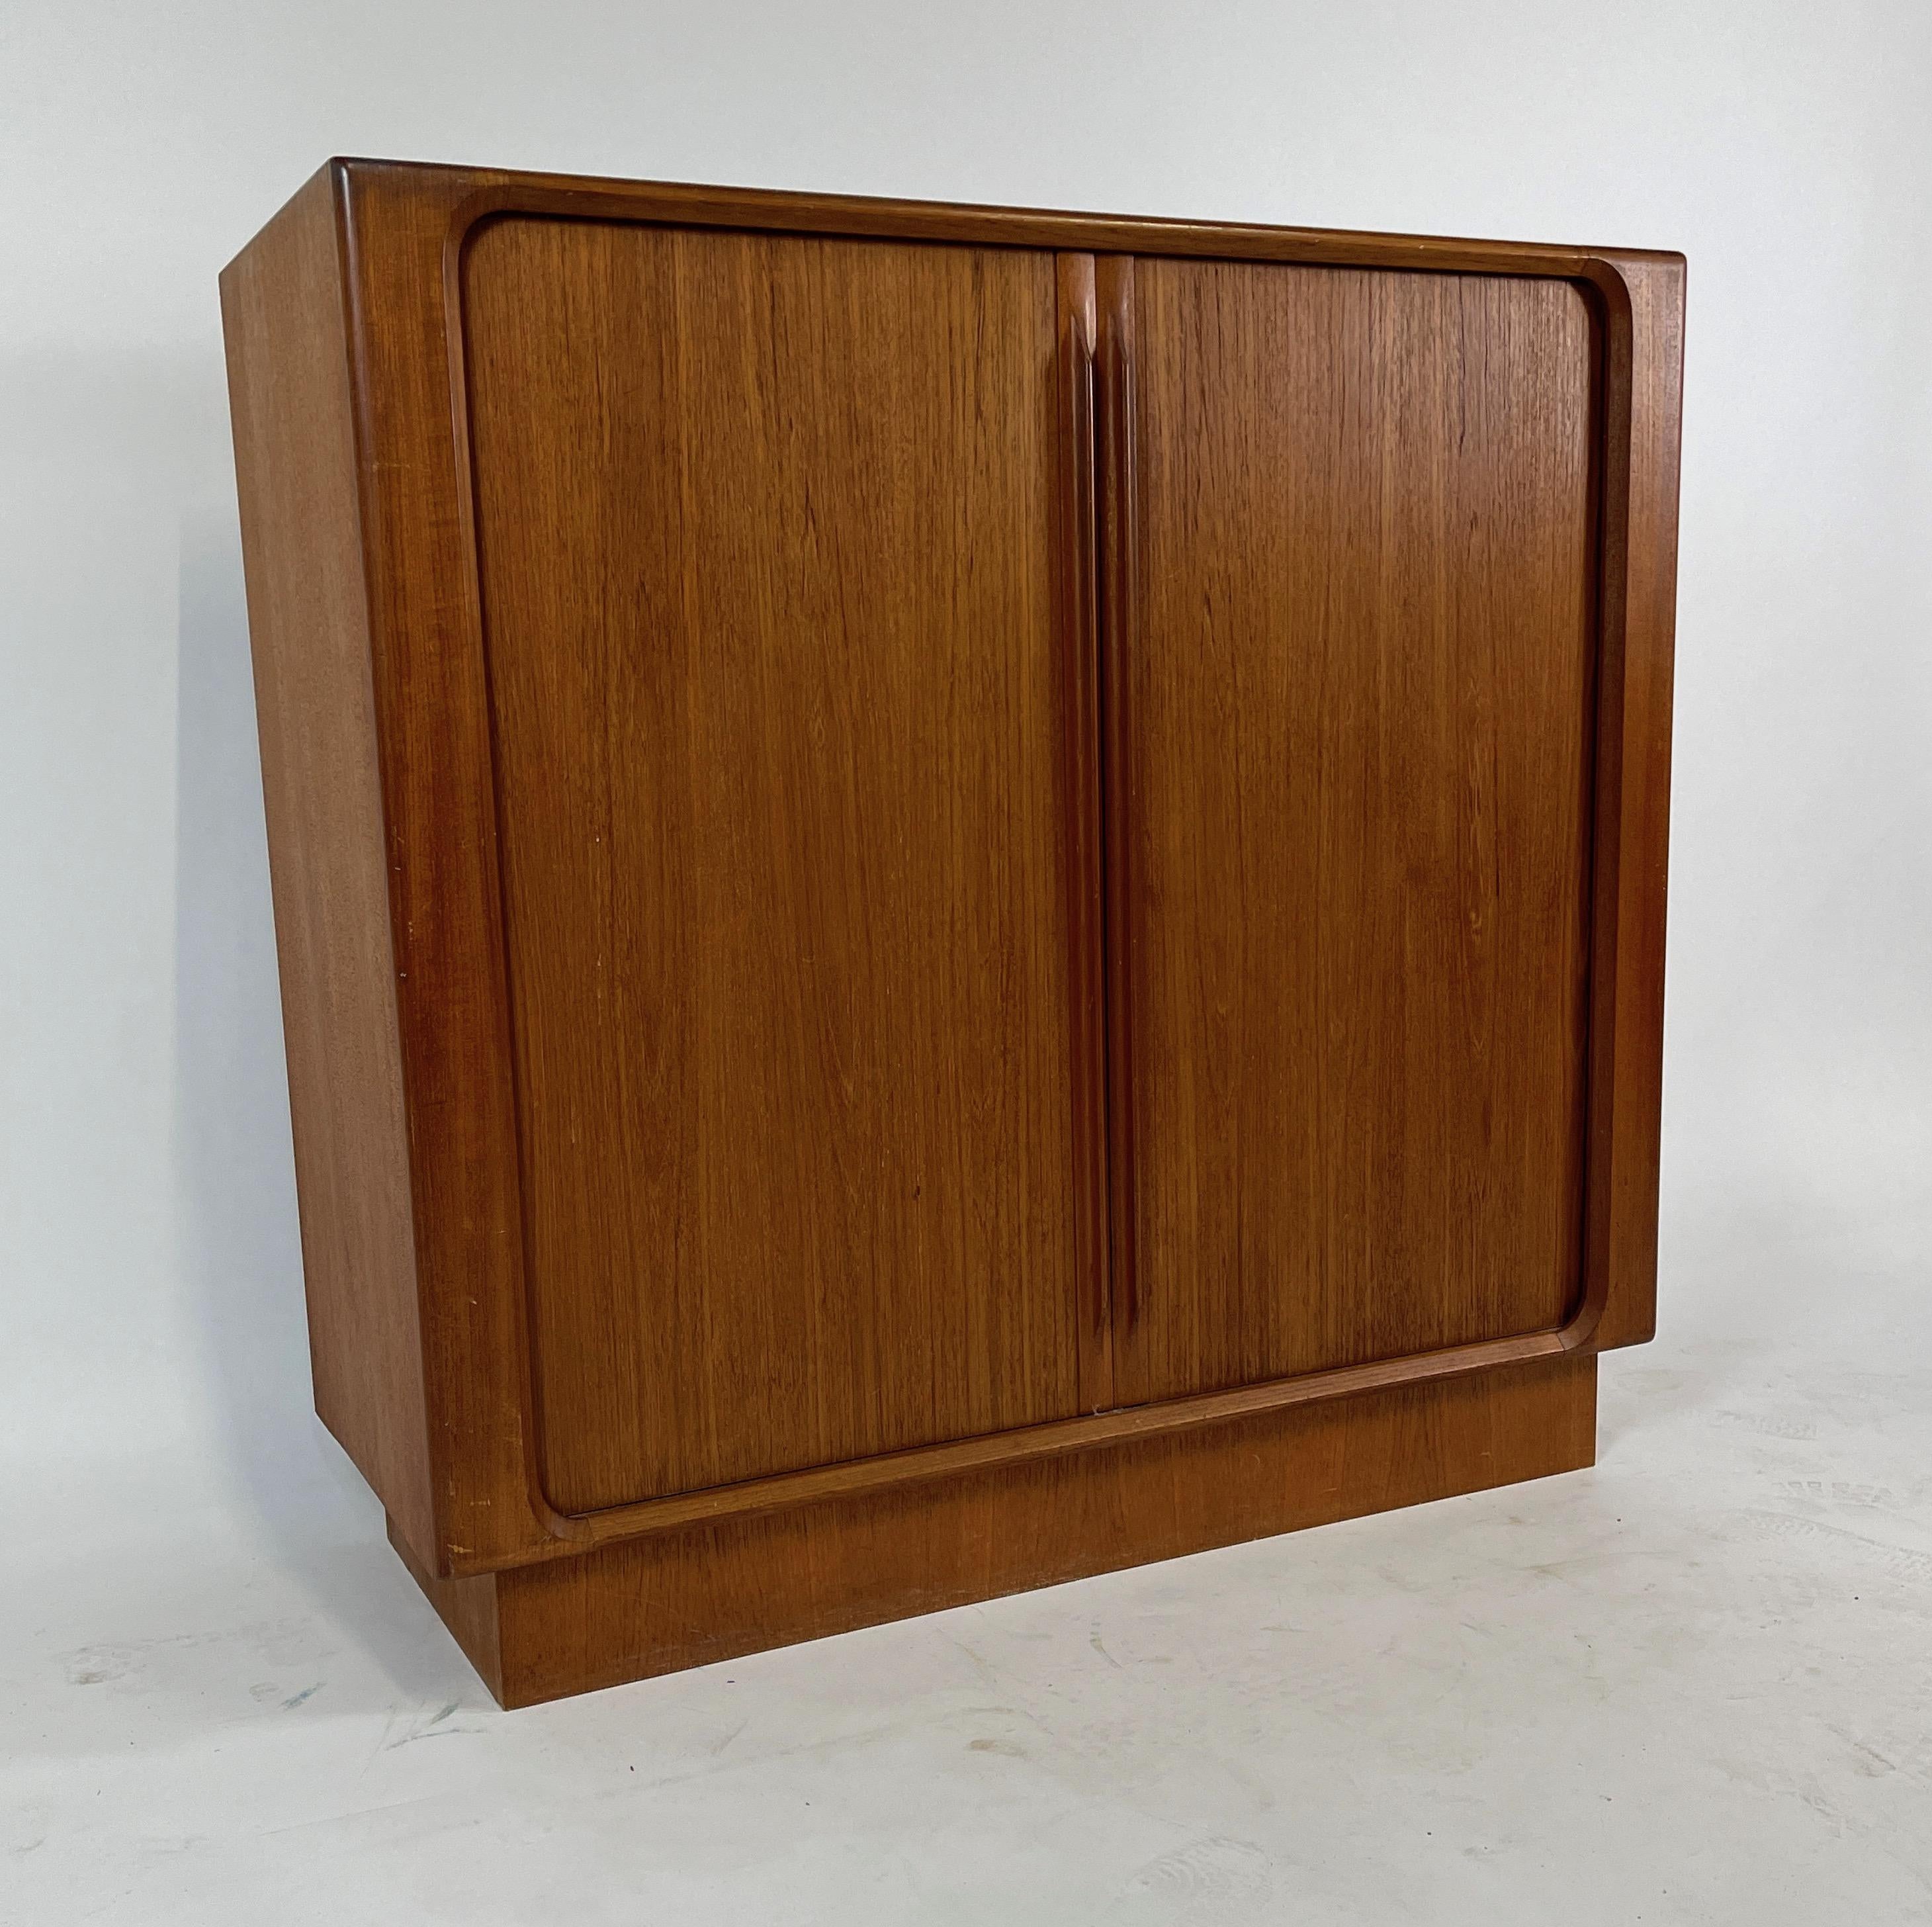 Tall Danish storage piece with ample storage hidden behind very smooth tambour doors. This piece is absolutely stunning in person!
The back is also finished nicely.